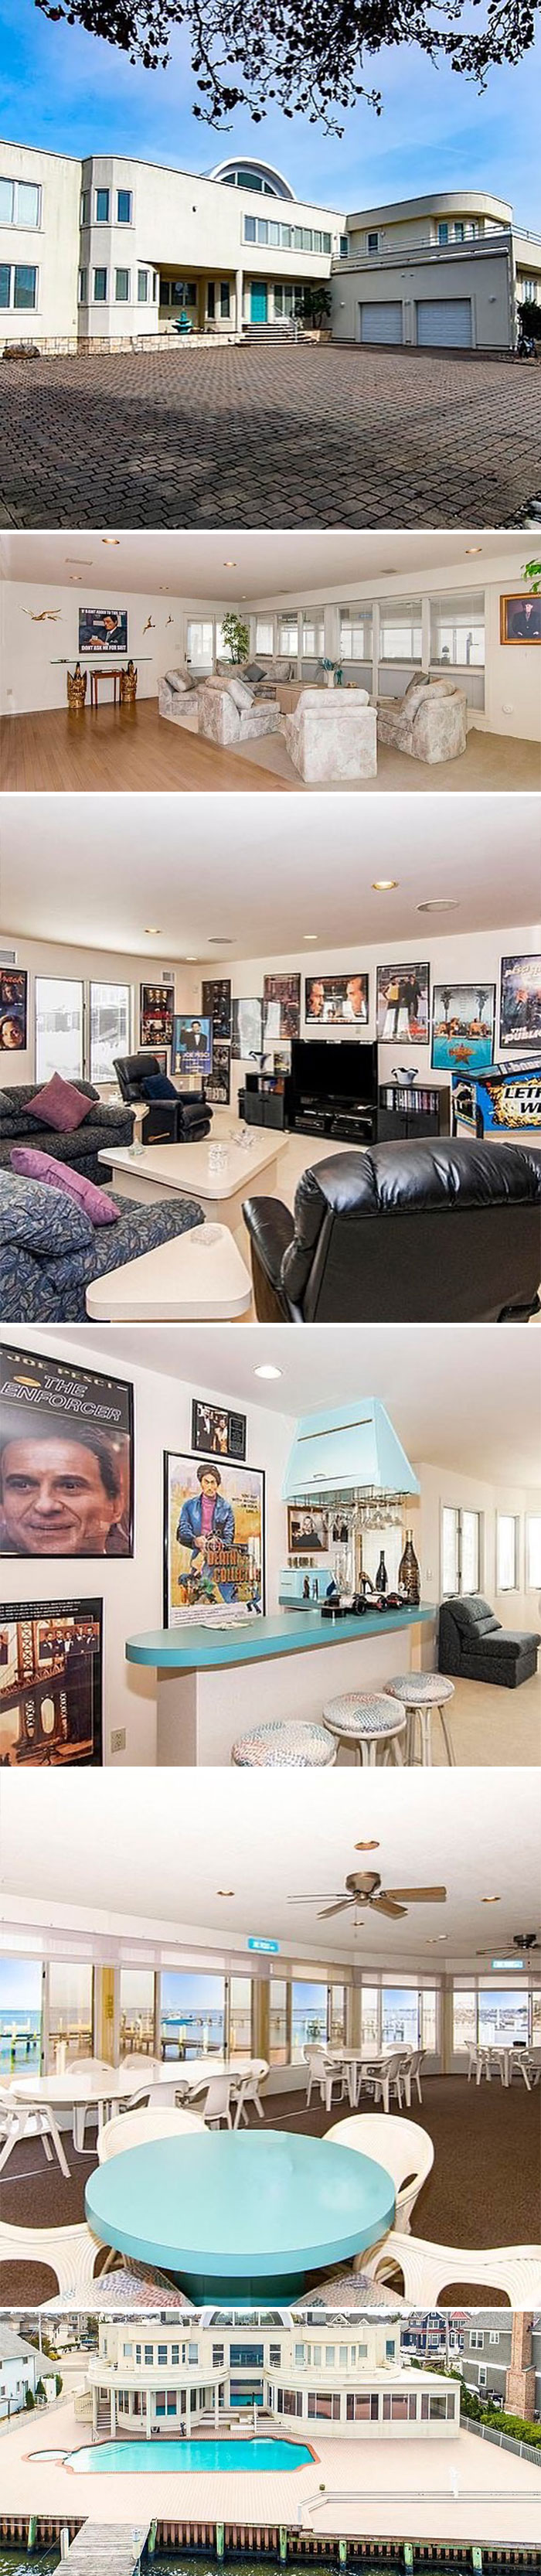 This Is Exactly What I’d Expect From Joe Pesci’s Jersey Shore Home. $6,500,000. 8 Bd, 8 Ba. 7,219 Sf